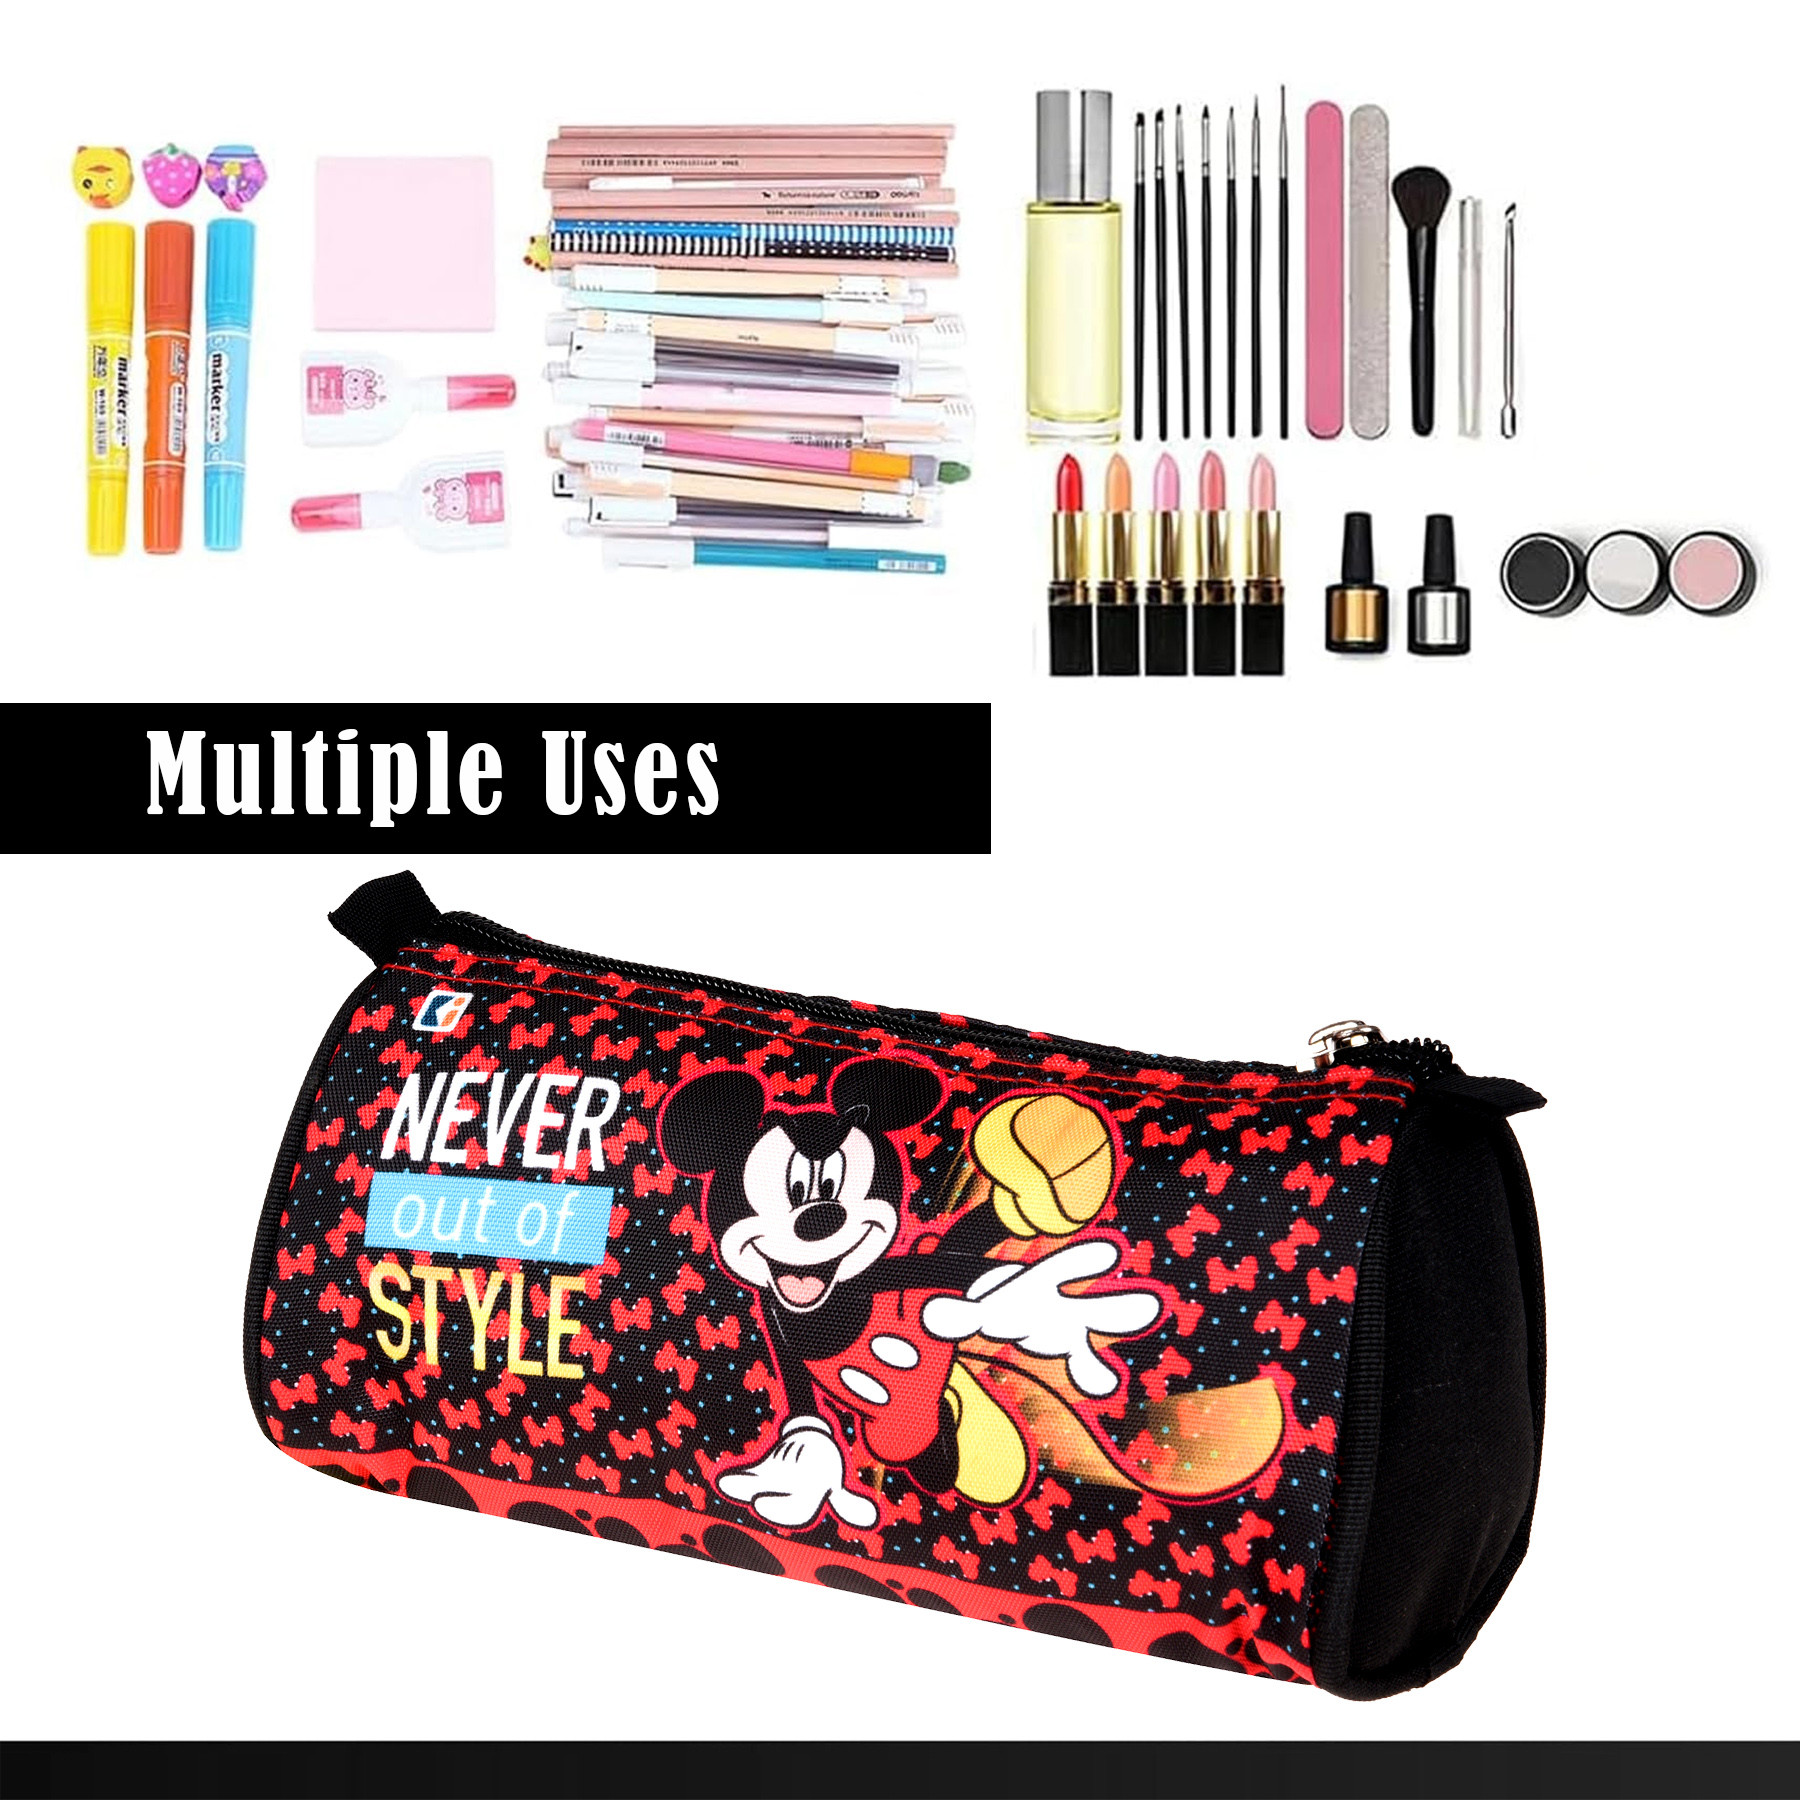 Kuber Industries Pencil Pouch | Multi-Purpose Travel Pouch | Kids Stationary Storage Bag | Pencil Utility School Pouches | Disney Geometry Box | Large | Black & Pink